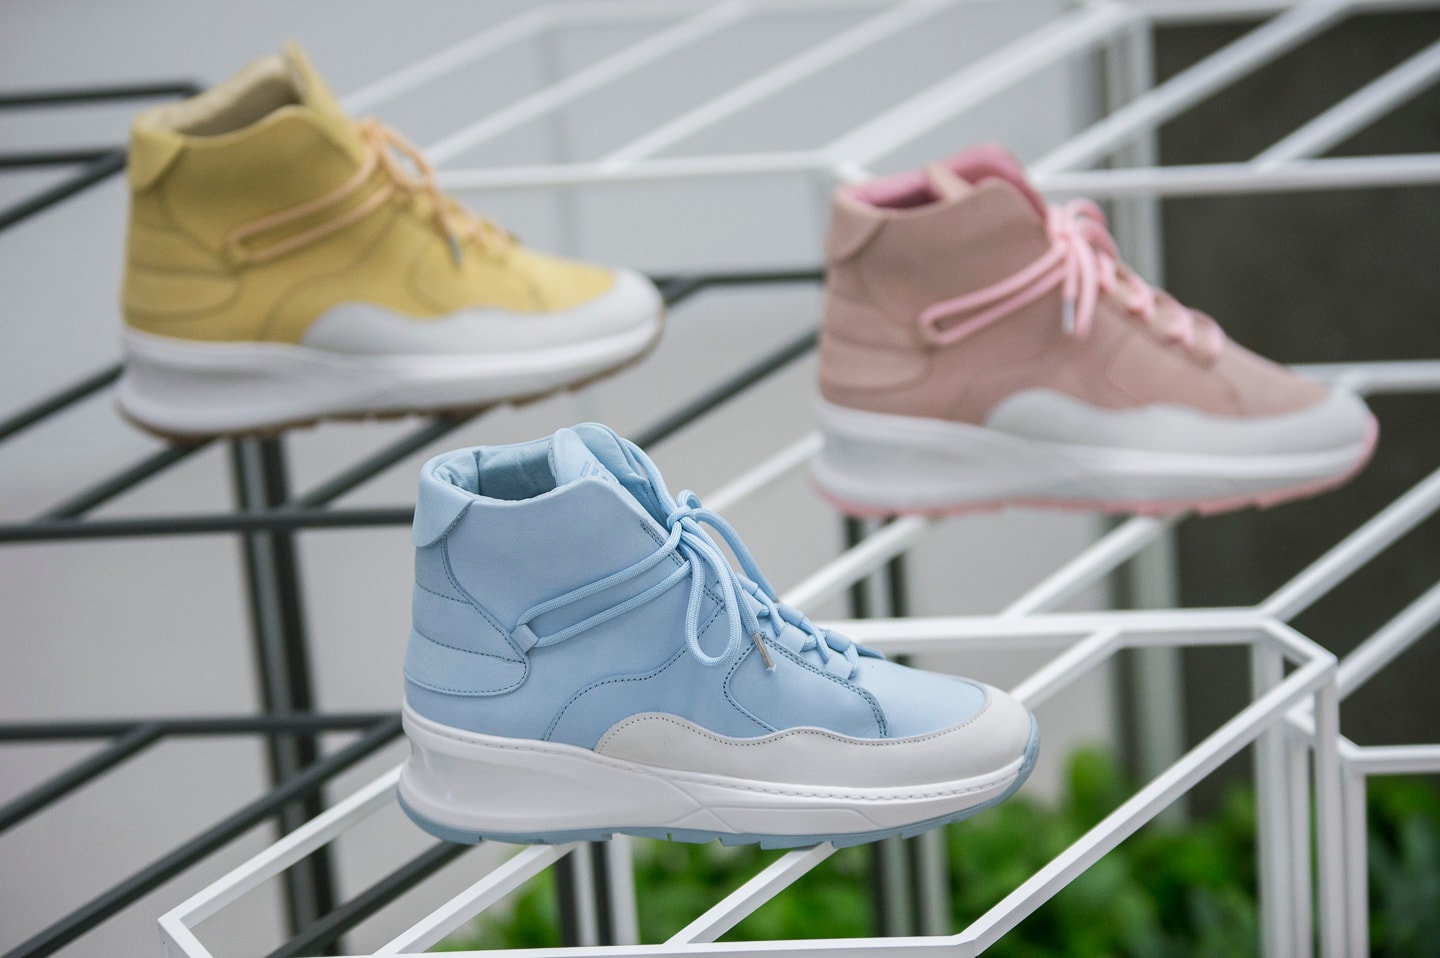 Filling Pieces 2018 Spring/Summer Collection